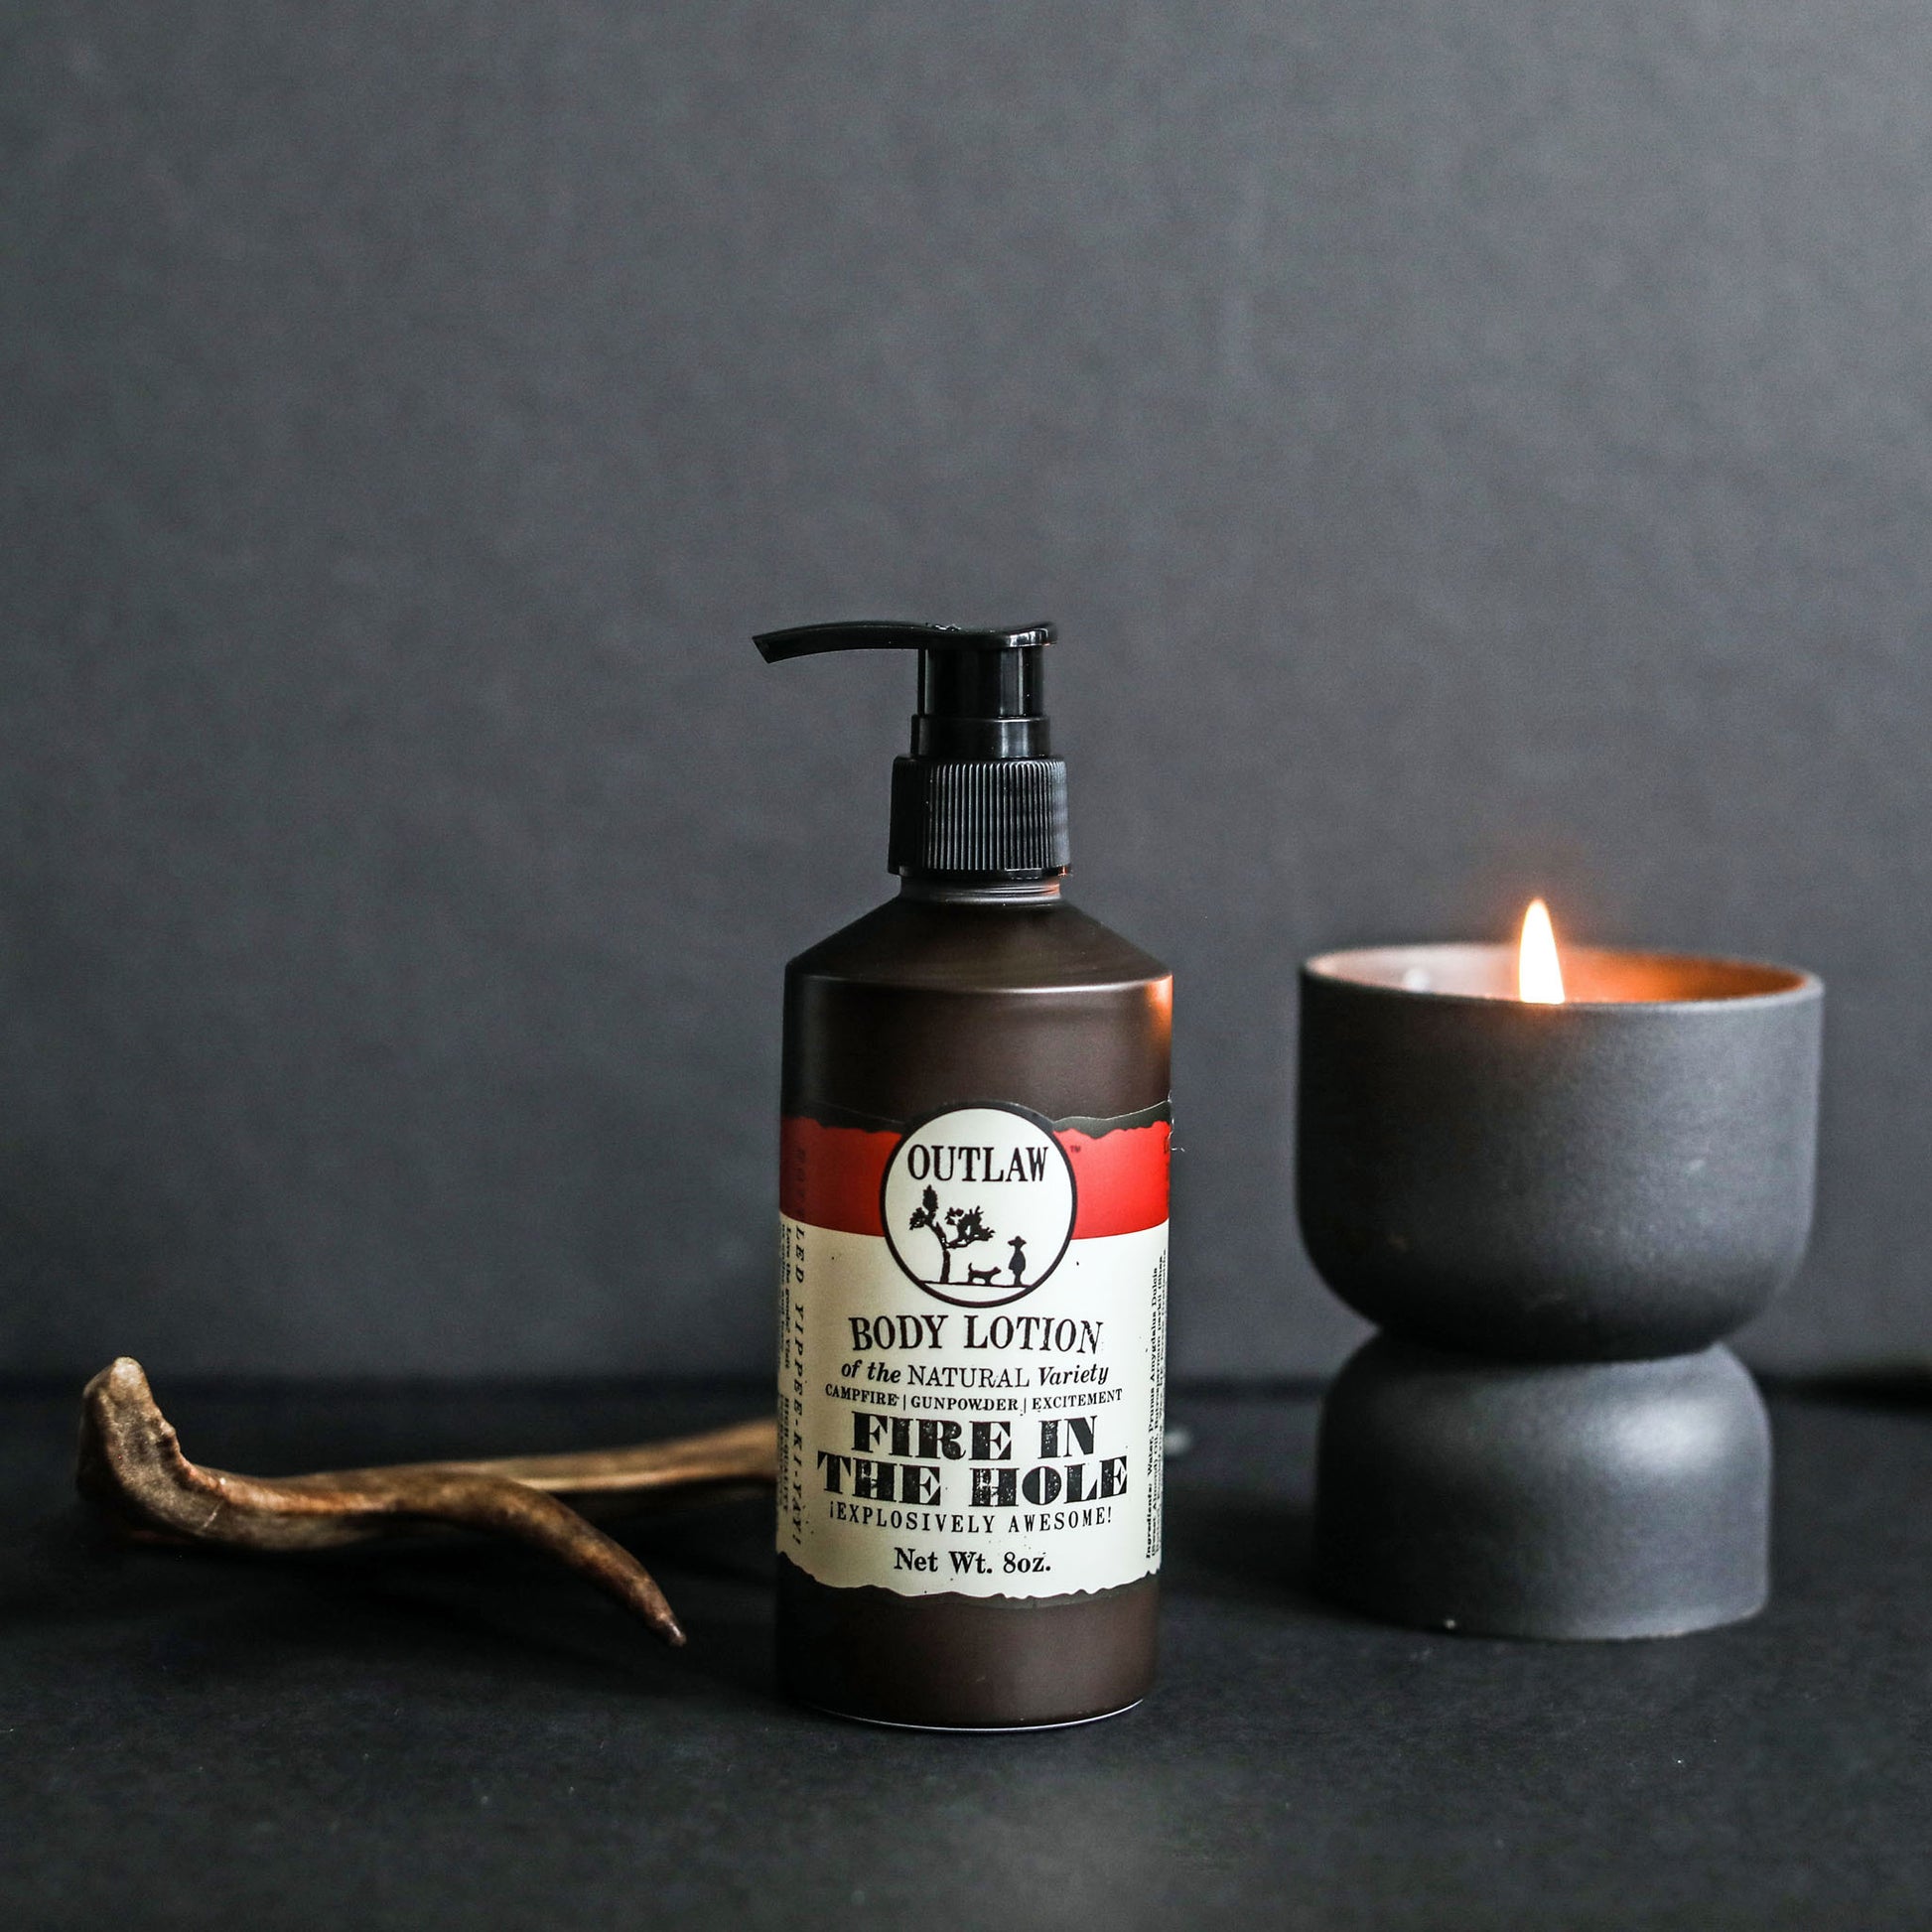 Fire in the Hole campfire natural body lotion by Outlaw